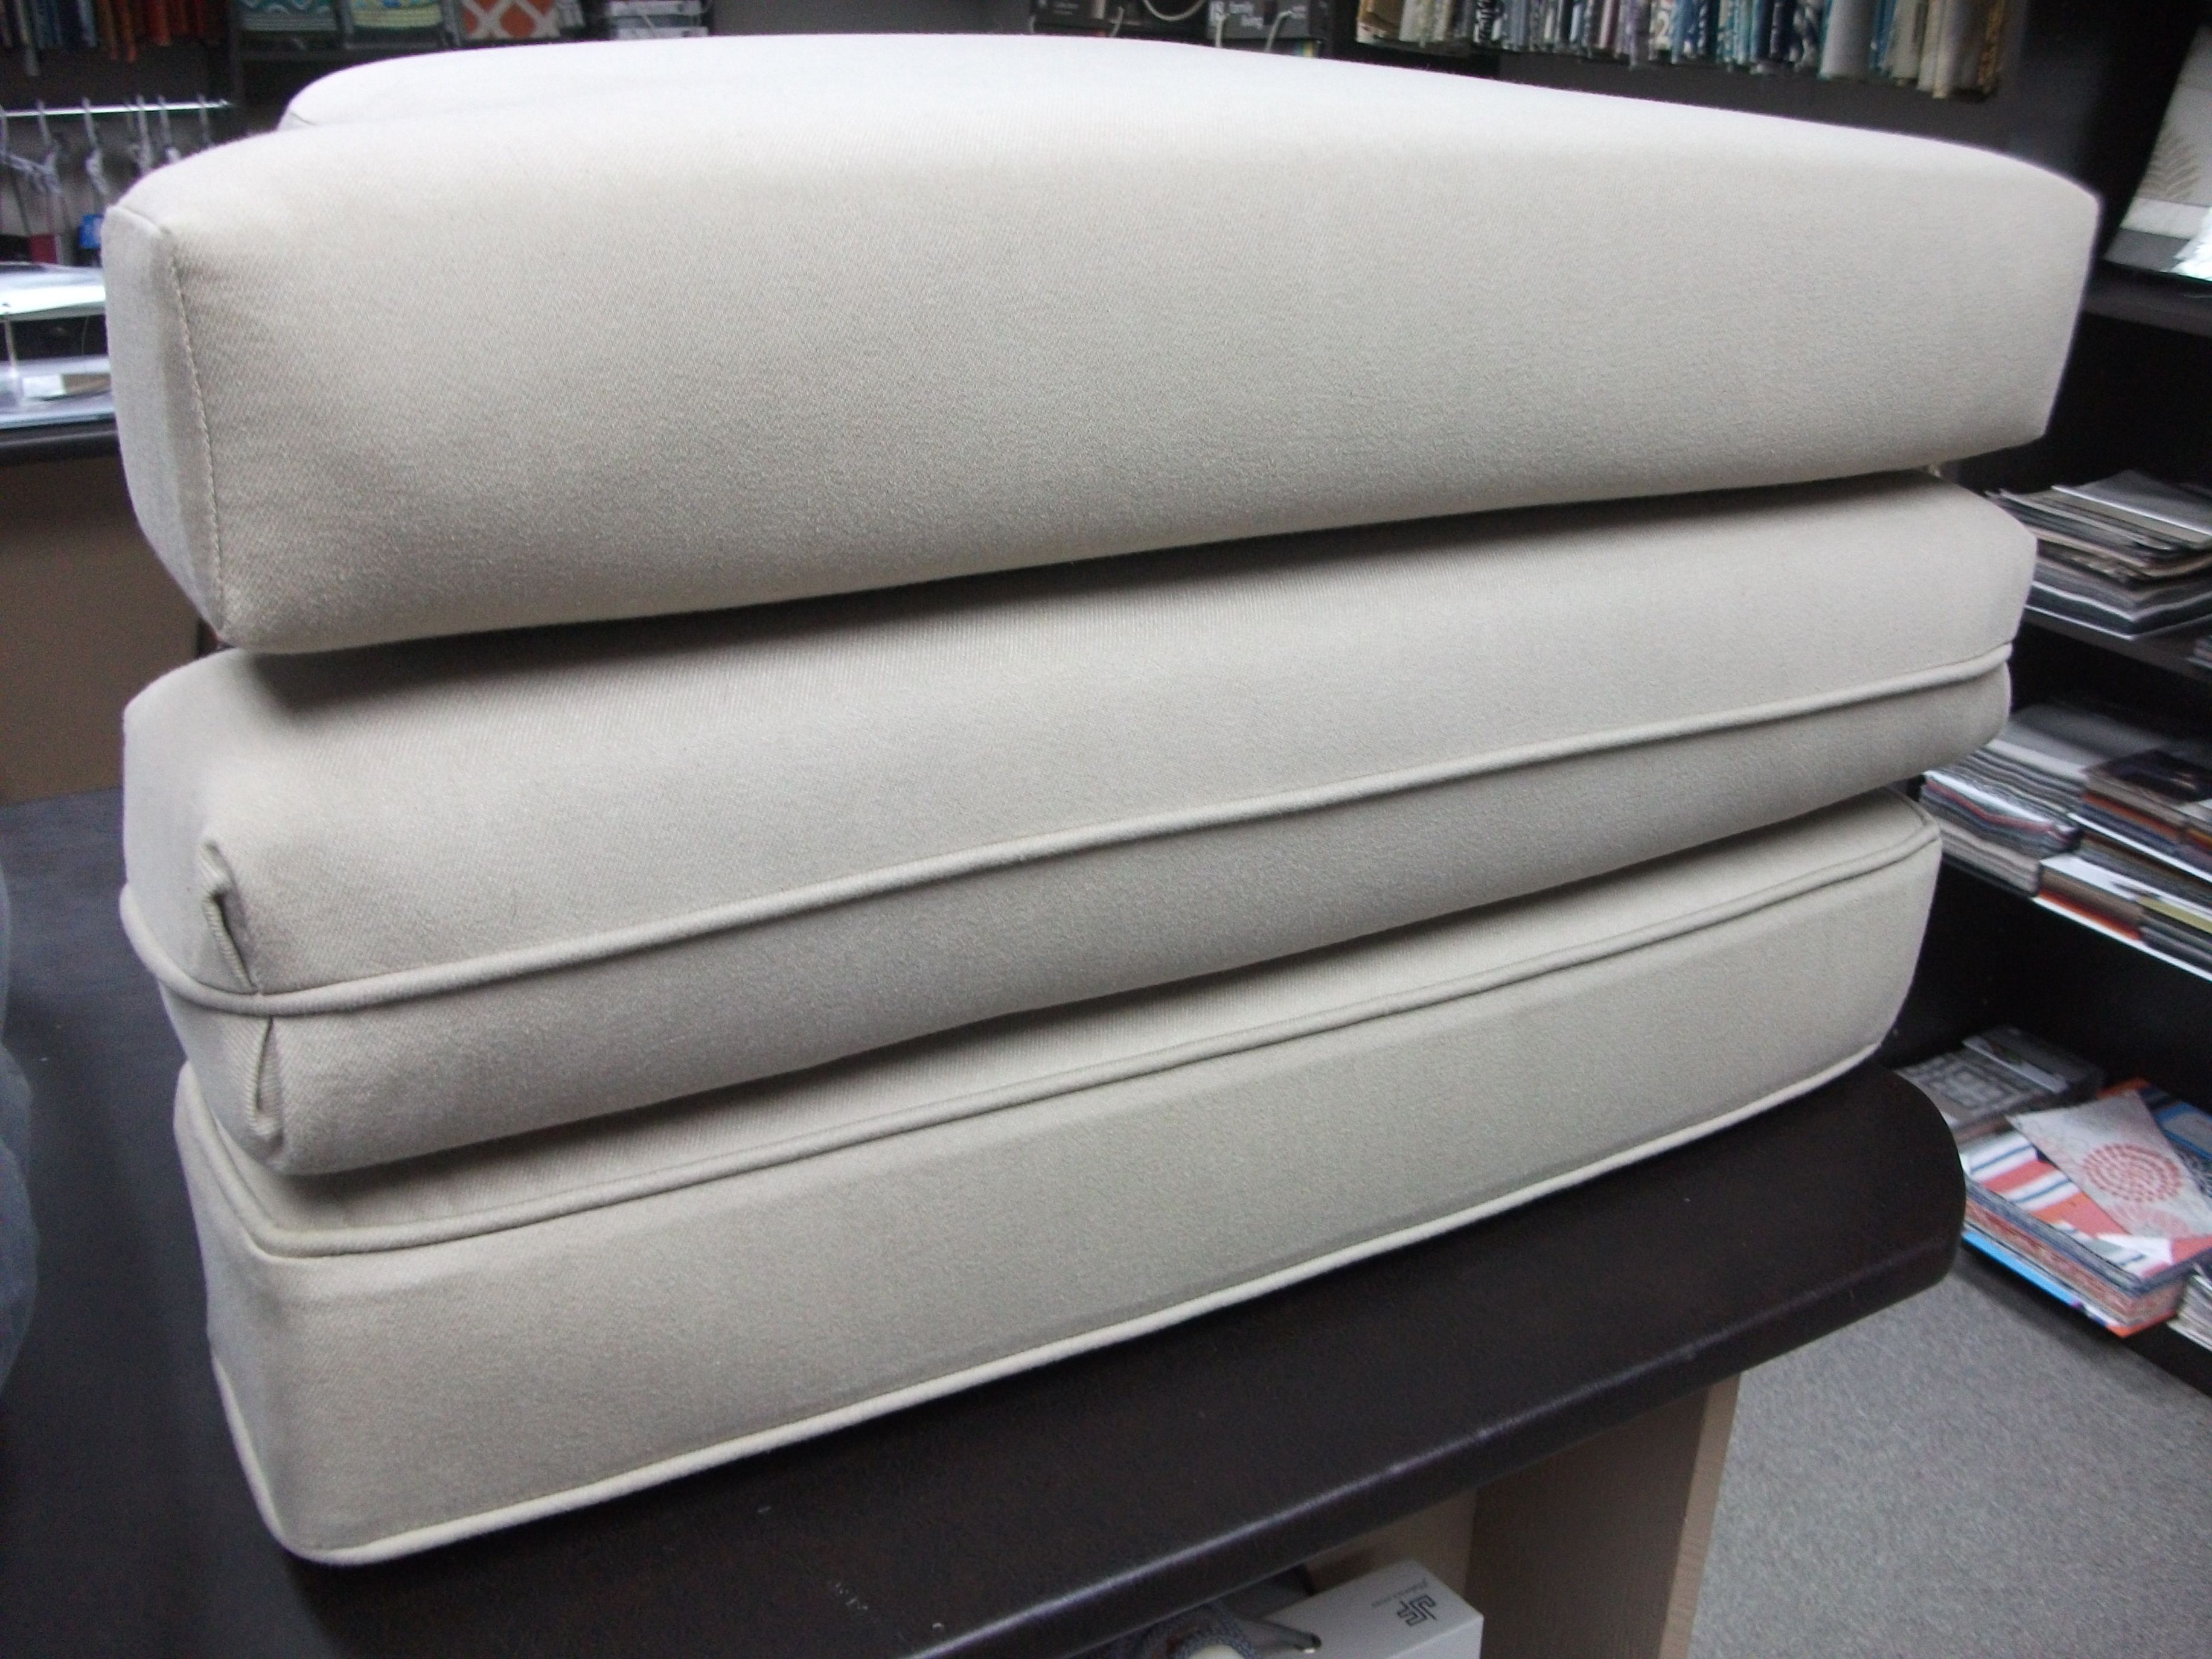 Restwell Reupholstered Couch Cushions